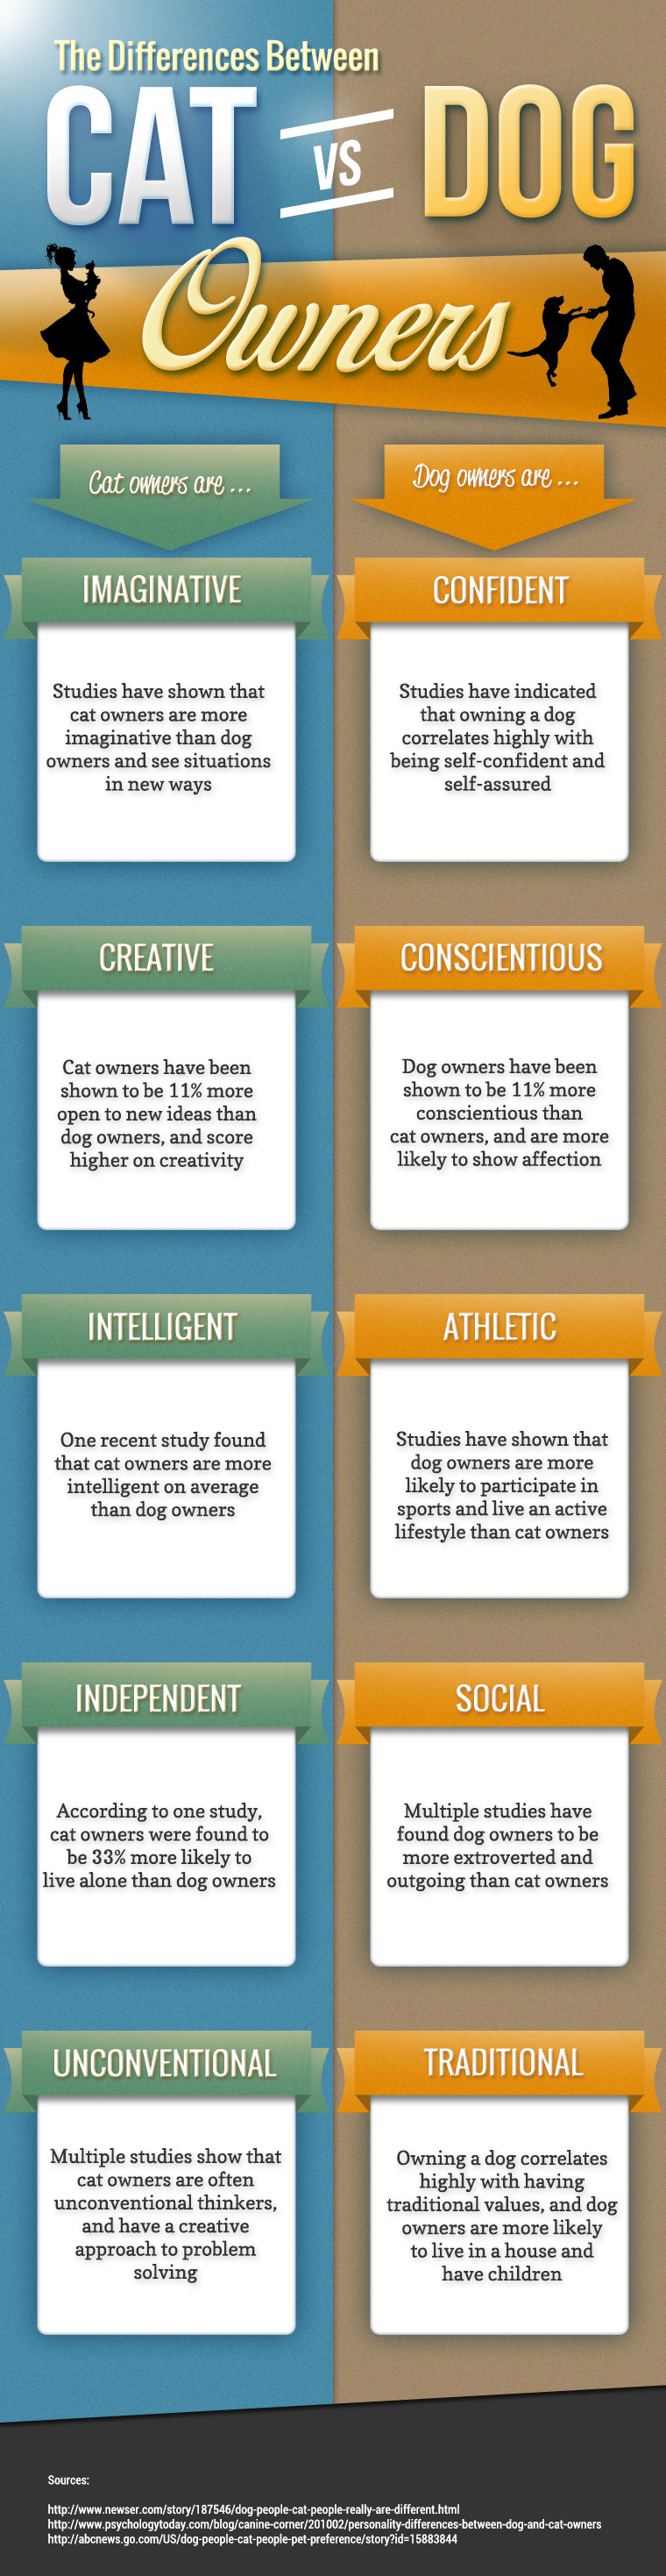 Differences Between Cat and Dog Owners Infographic